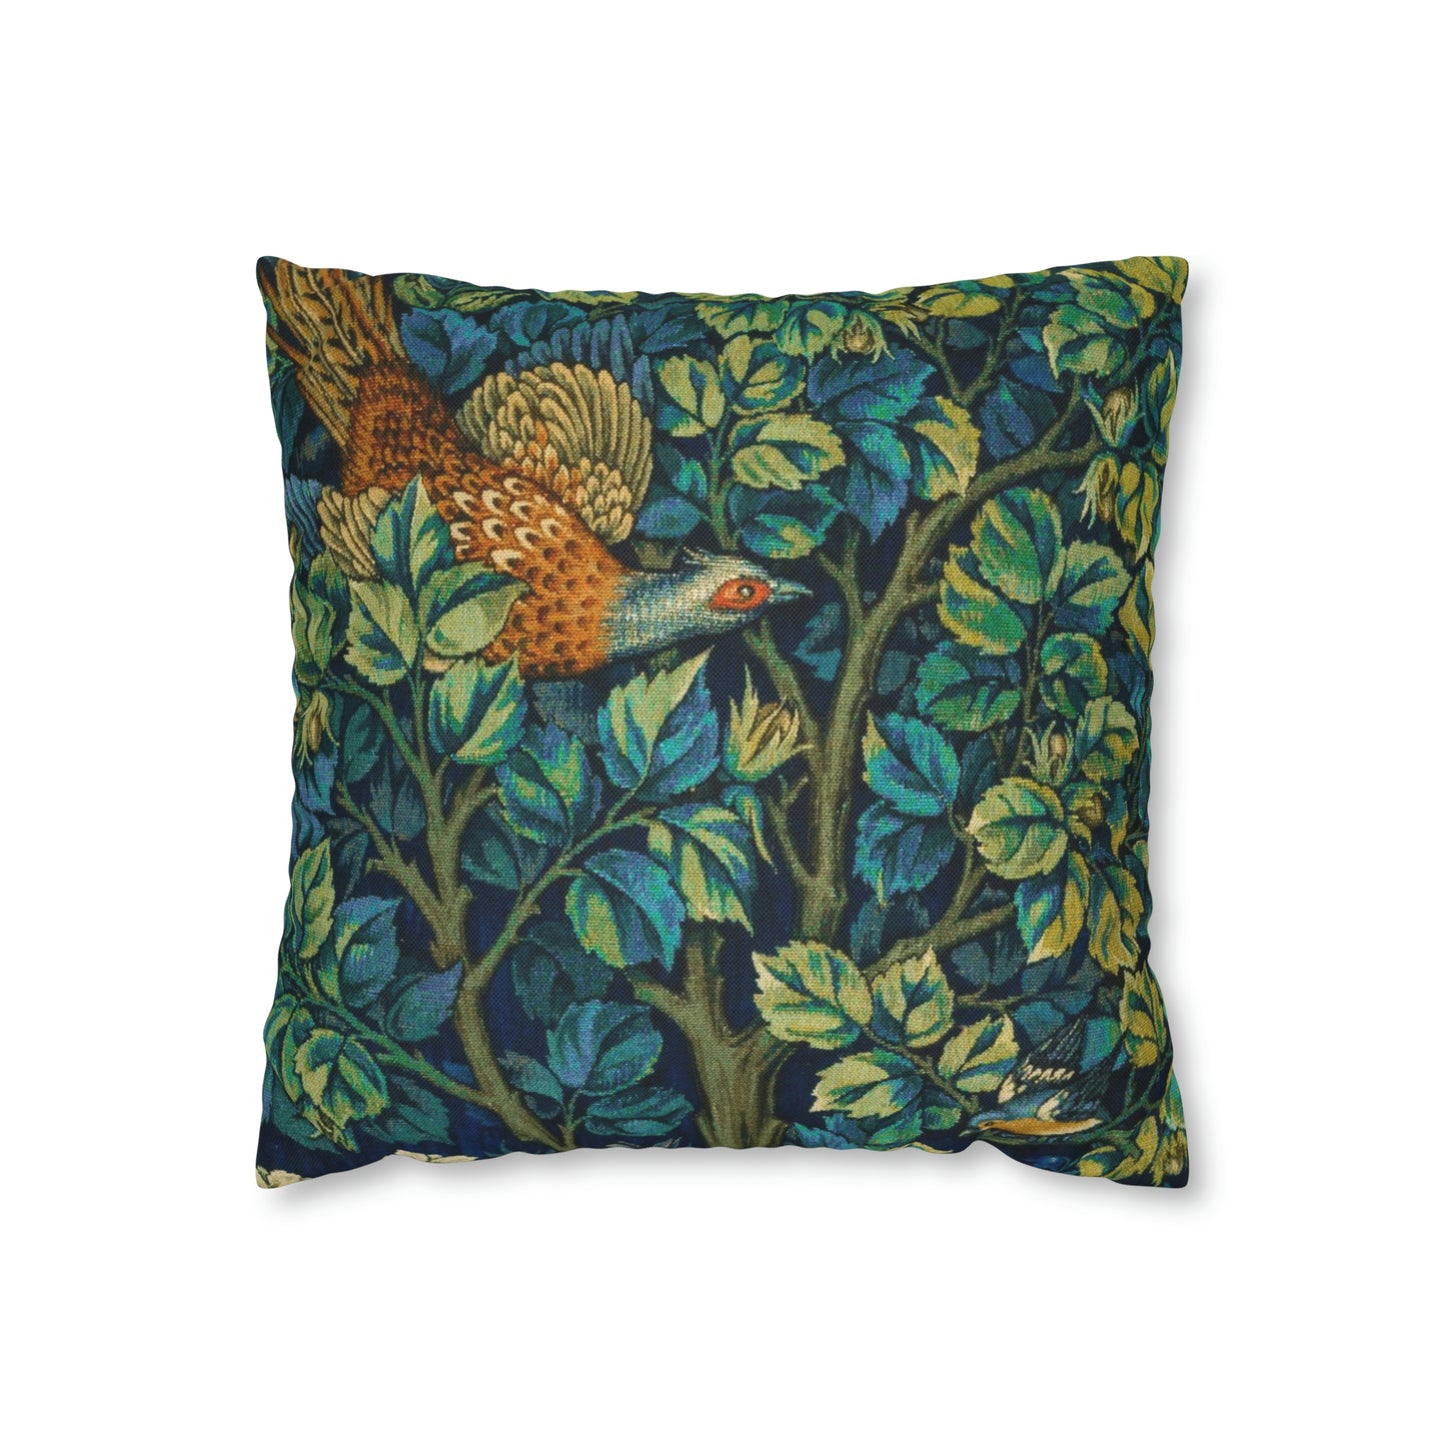 william-morris-co-cushion-cover-pheasant-and-squirrel-collection-pheasant-blue-8